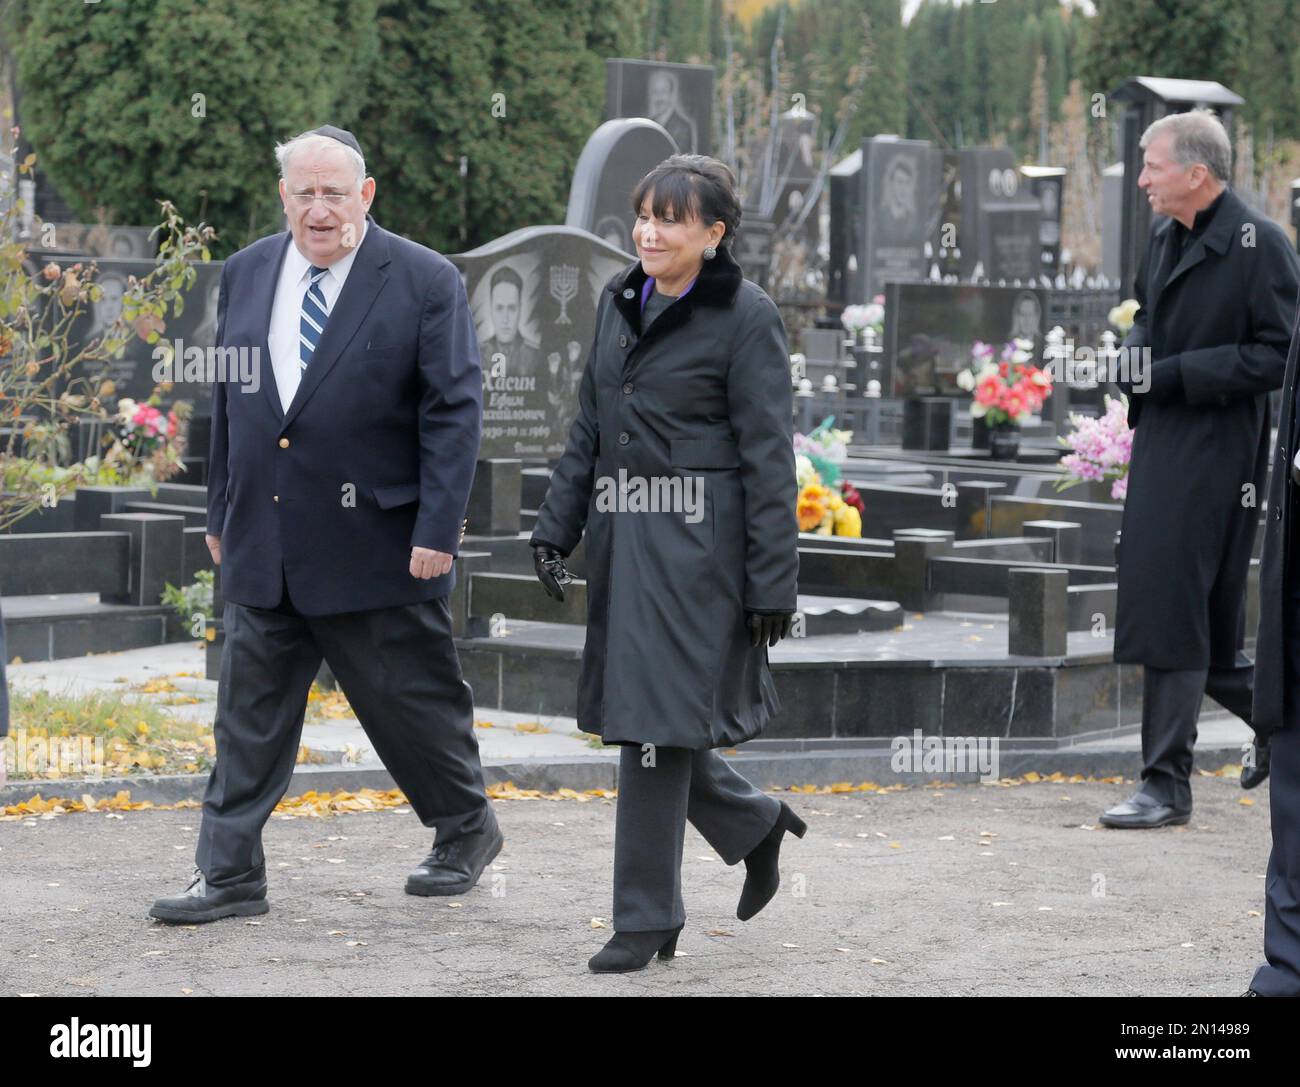 U.S. Commerce Secretary Penny Pritzker visits a Jewish cemetery in the ...